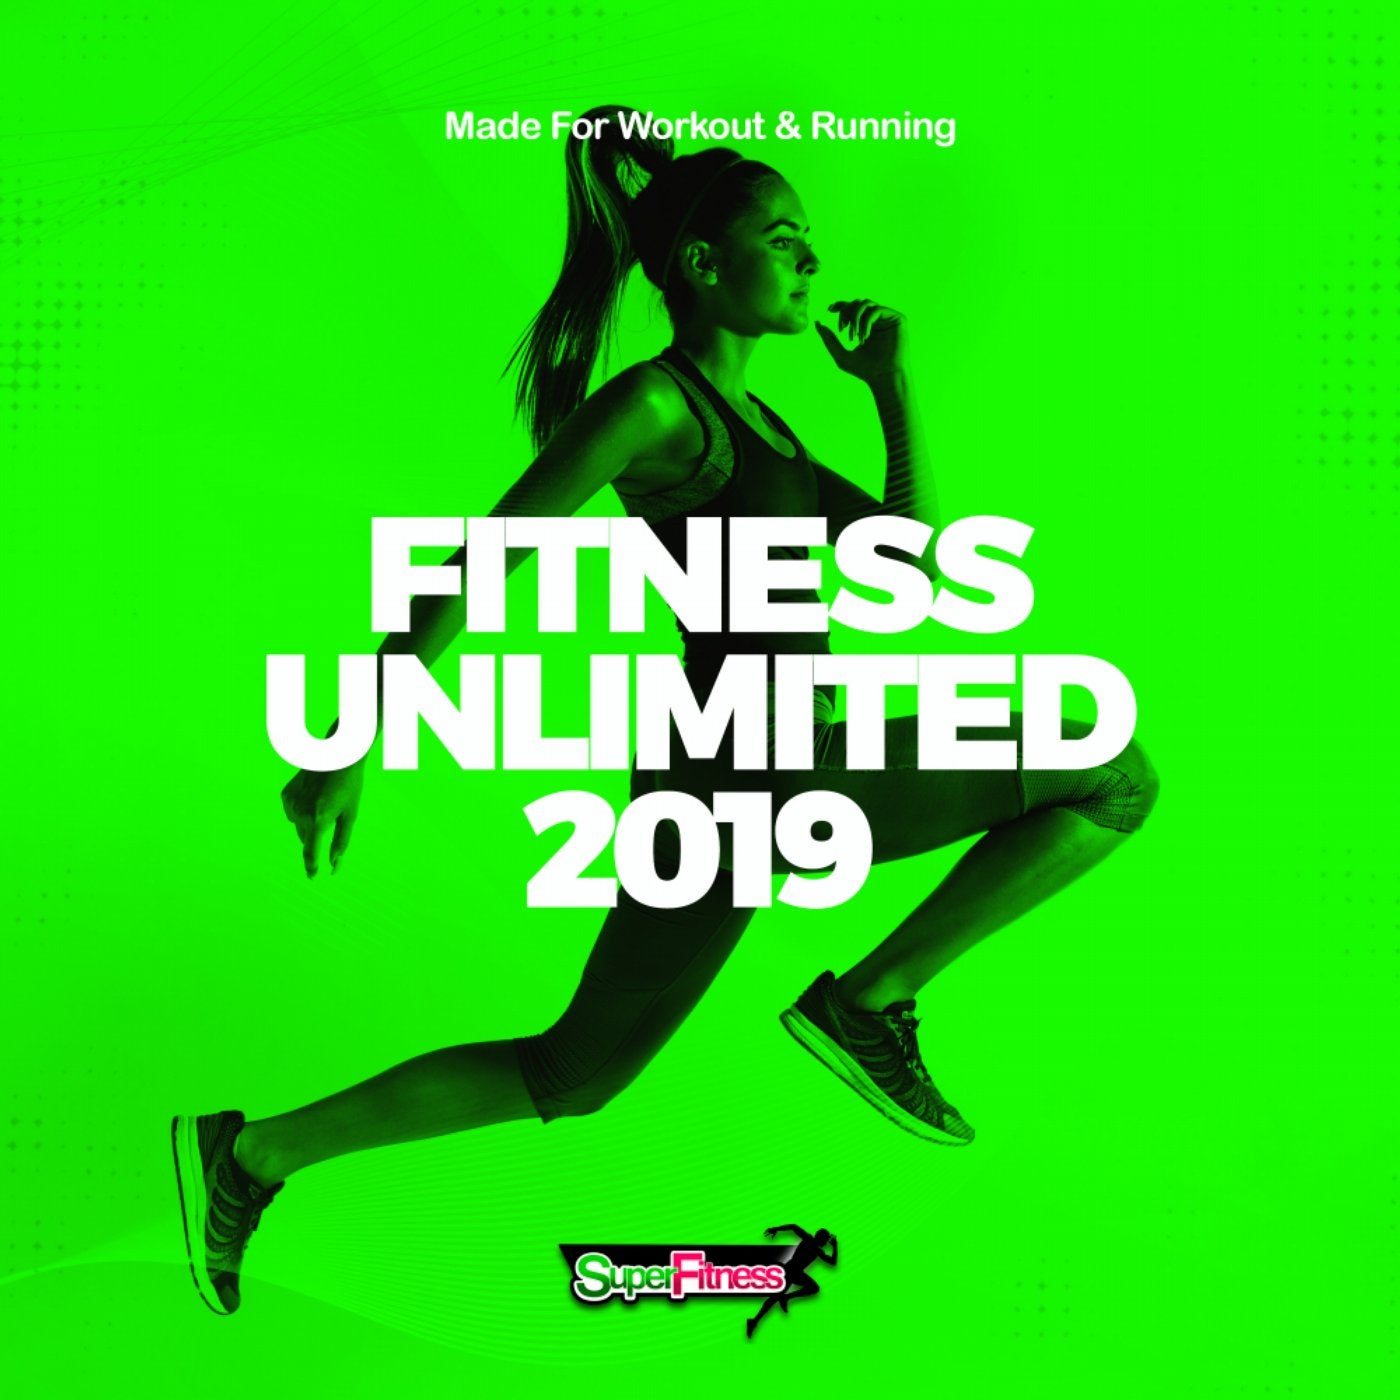 Fitness Unlimited 2019: Made For Workout & Running